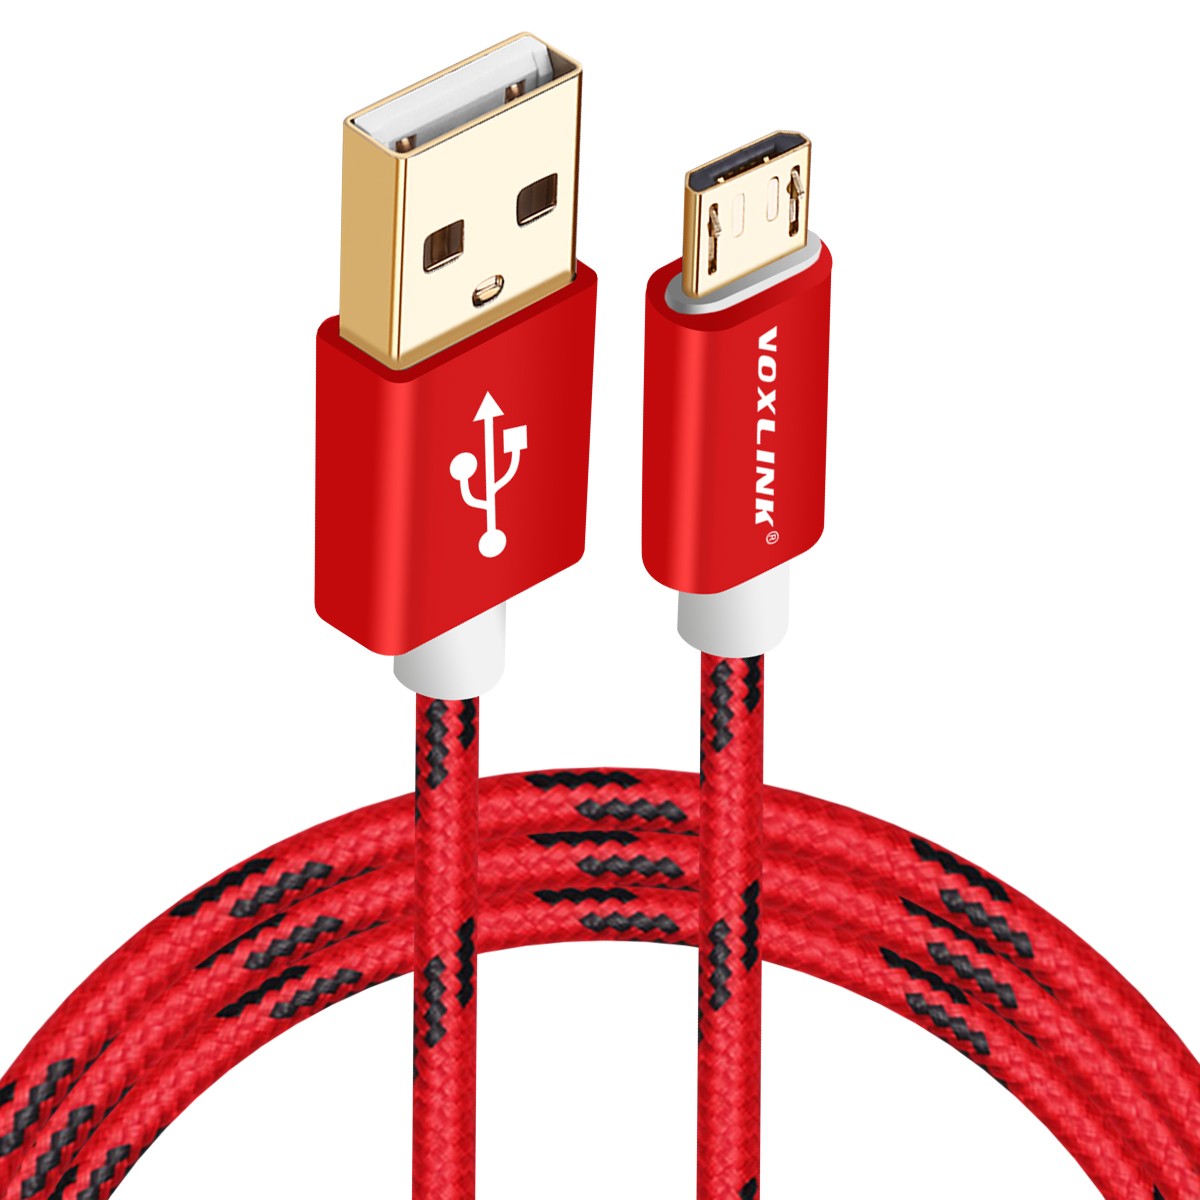 VOXLINK Micro USB Cable Fast Charger 5V 2A Nylon Braid Data Sync Charging Cable for Samsung Galaxy S7 S6 Huawei Xiaomi Meizu LG HTC Andriod Phones  red 0.5m